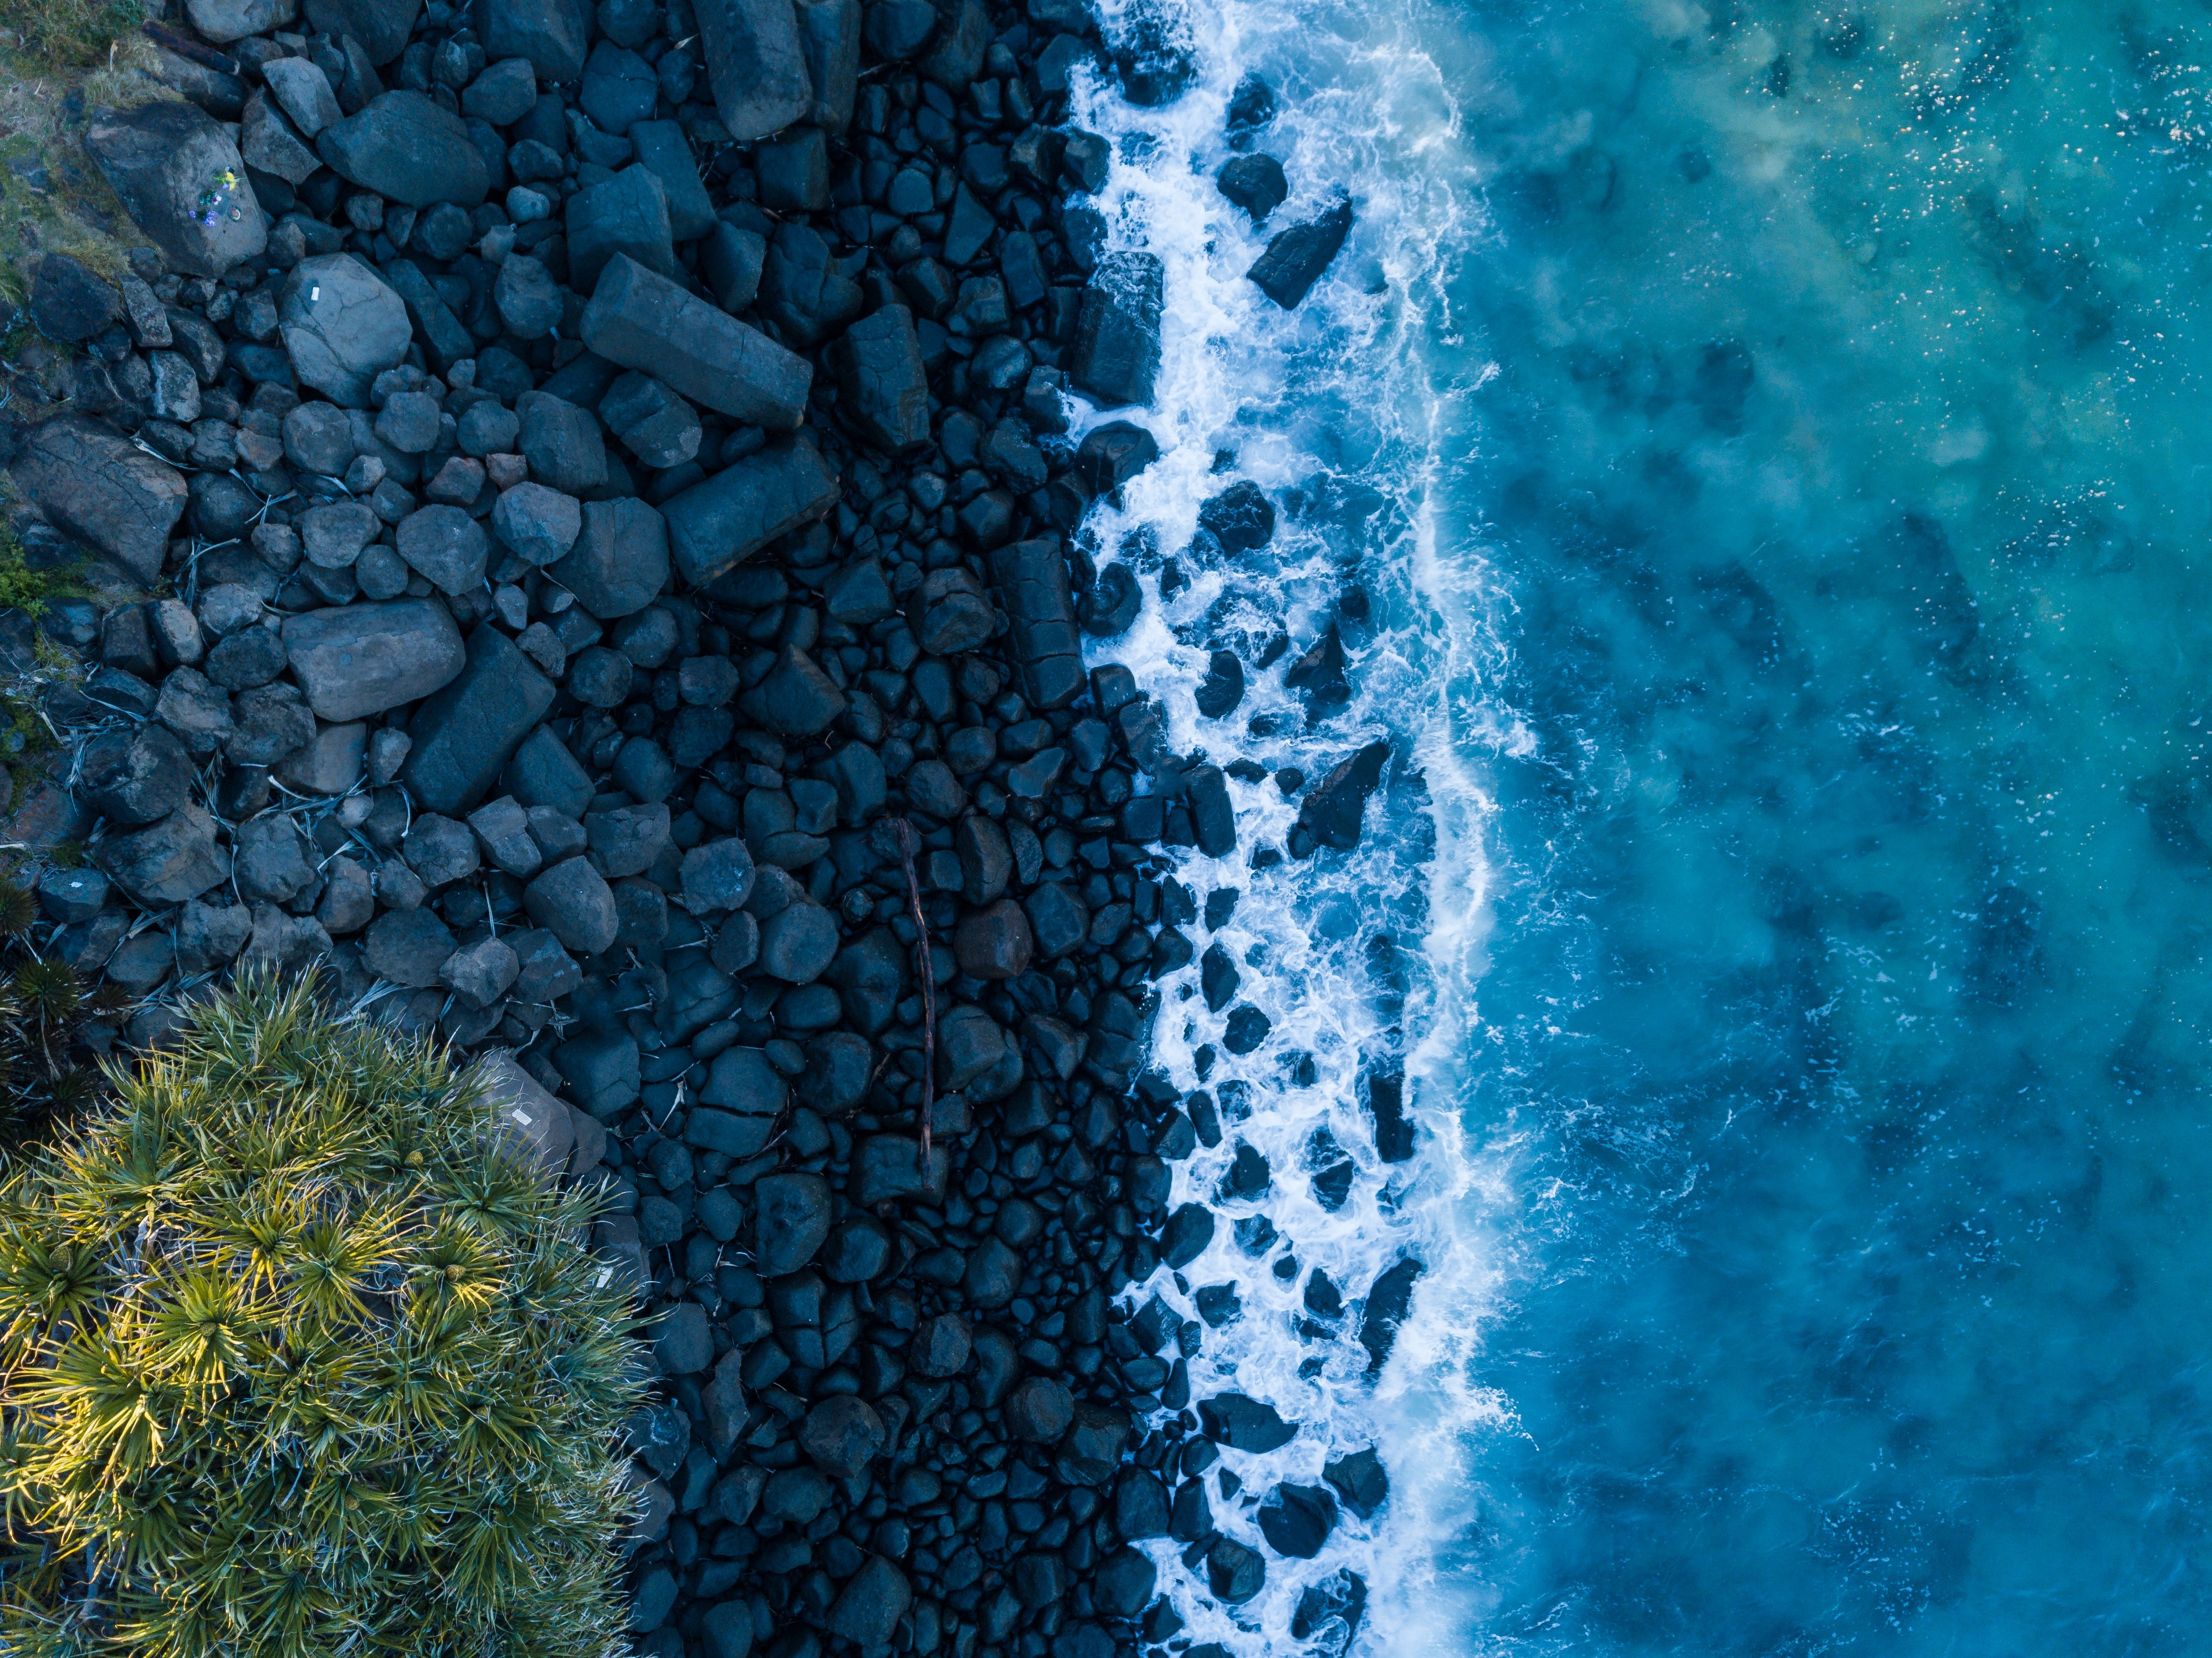 view from above, shore, ocean, bank, stones, surf, nature 1080p